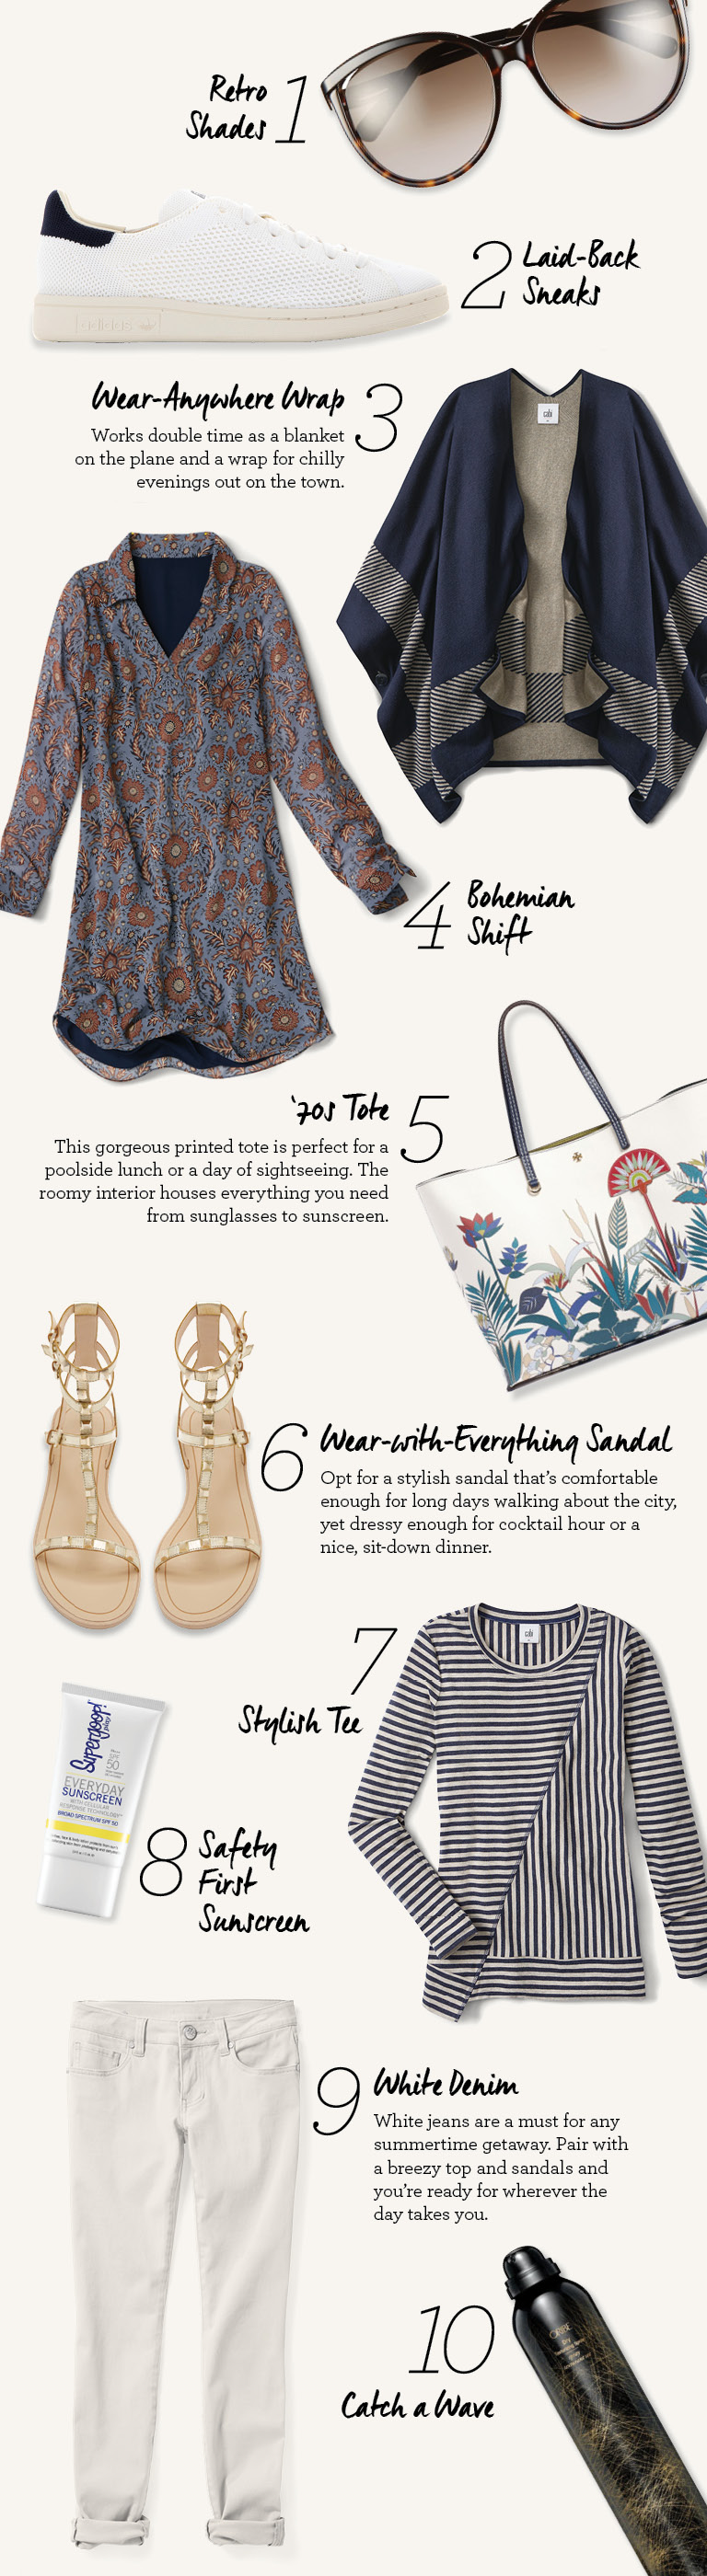 cabi Clothing | What to Pack for a Weekend Getaway